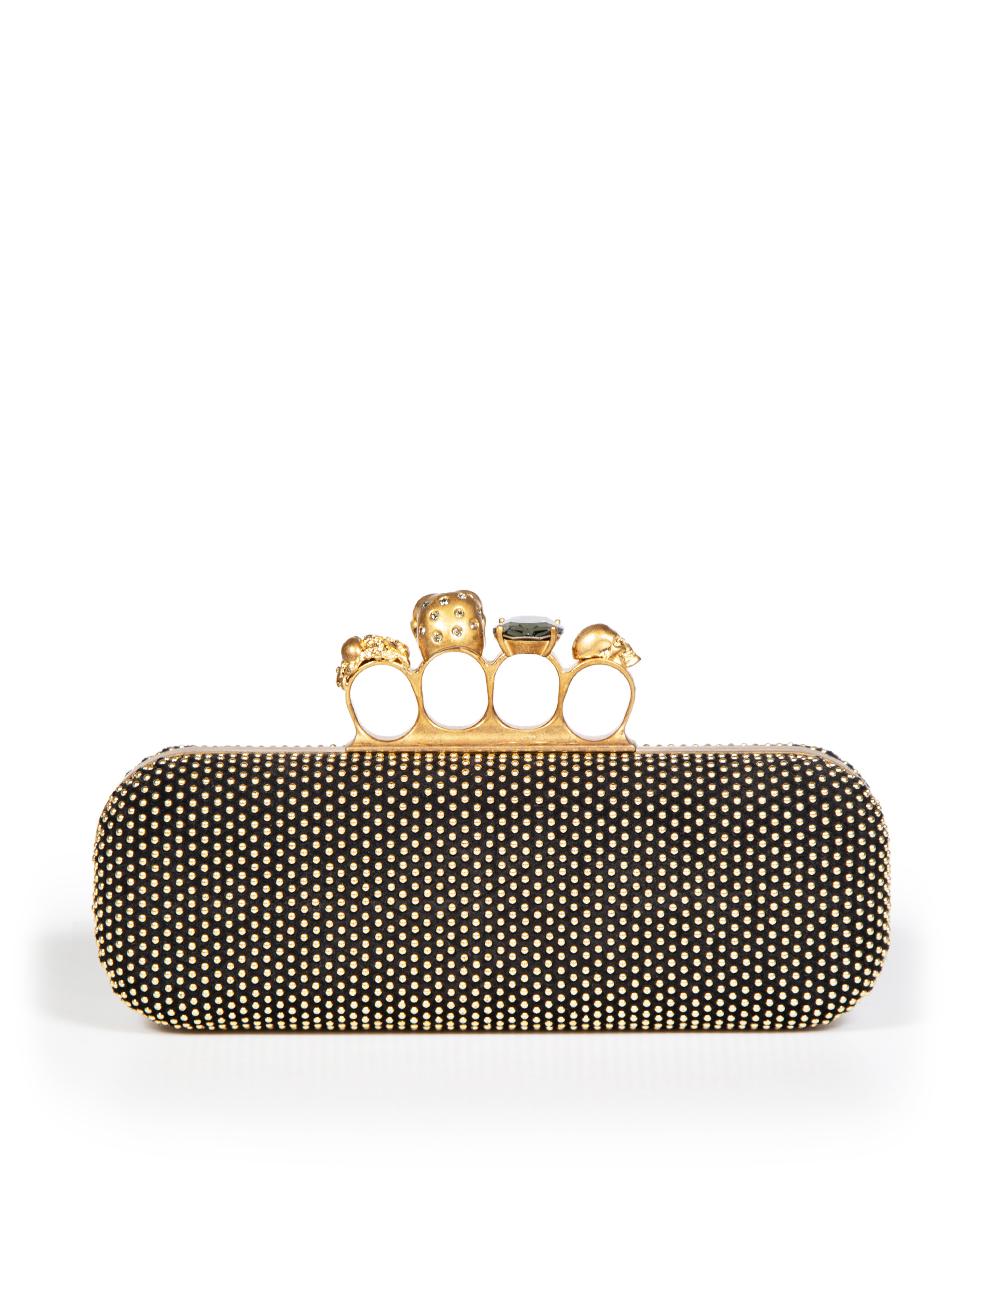 Alexander McQueen Gold Studded Brass Knuckles Box Clutch In Excellent Condition For Sale In London, GB